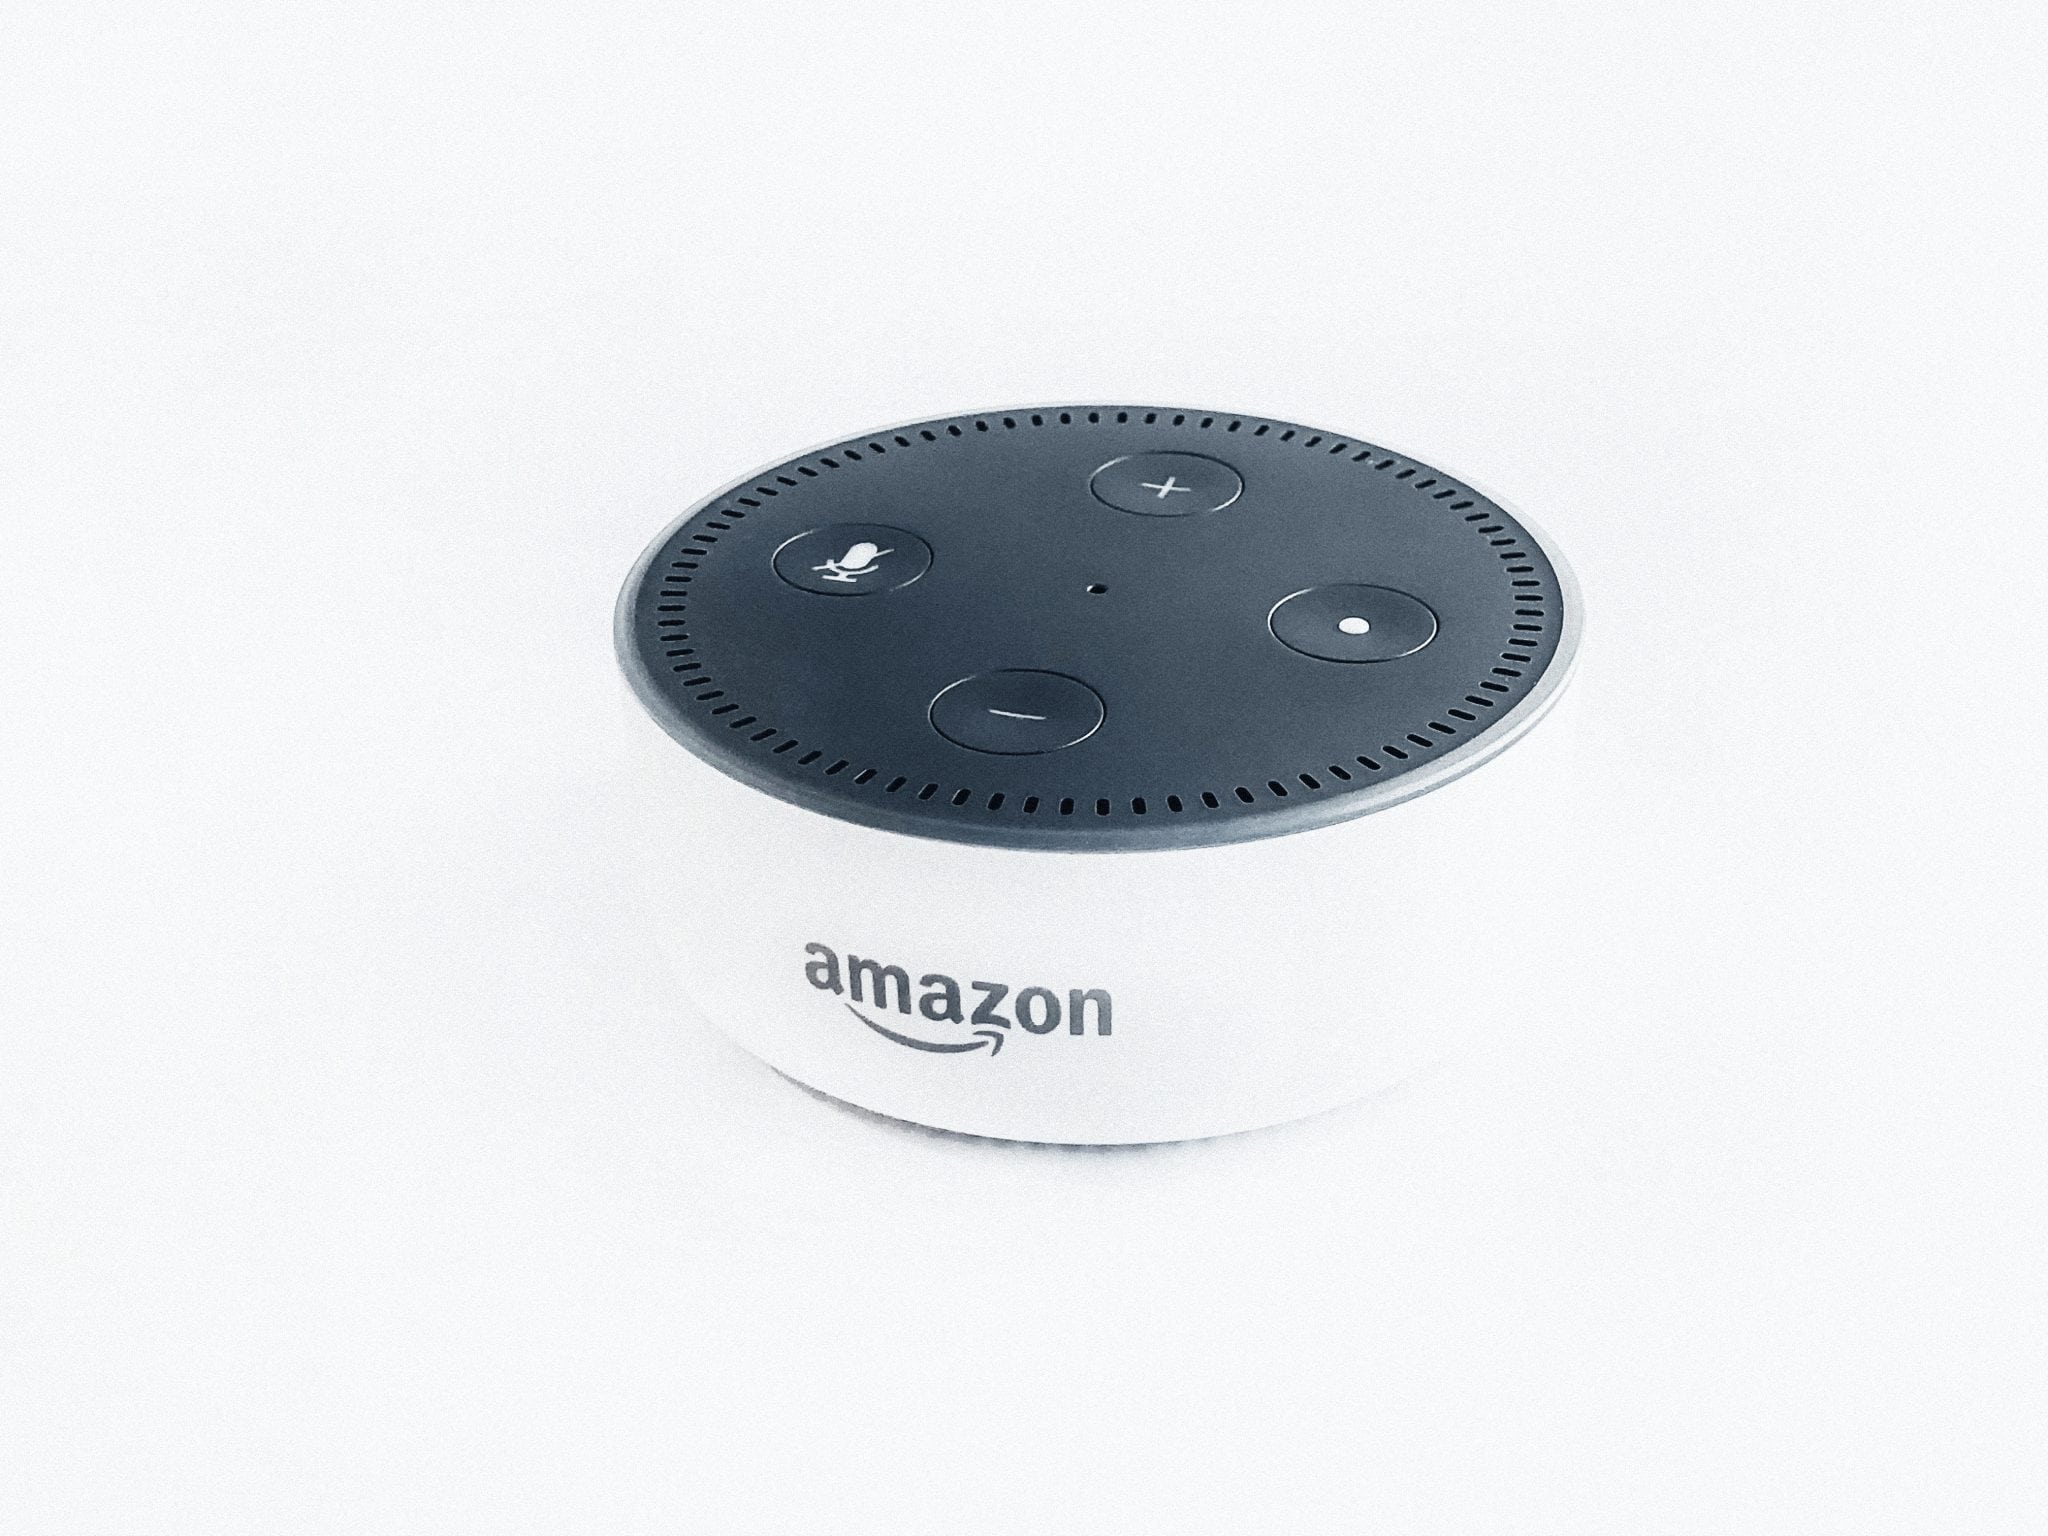 Alexa, how could Amazon upend travel business models?  The rise of voice search and smart devices, like the Echo pictured, could push Amazon into travel.
